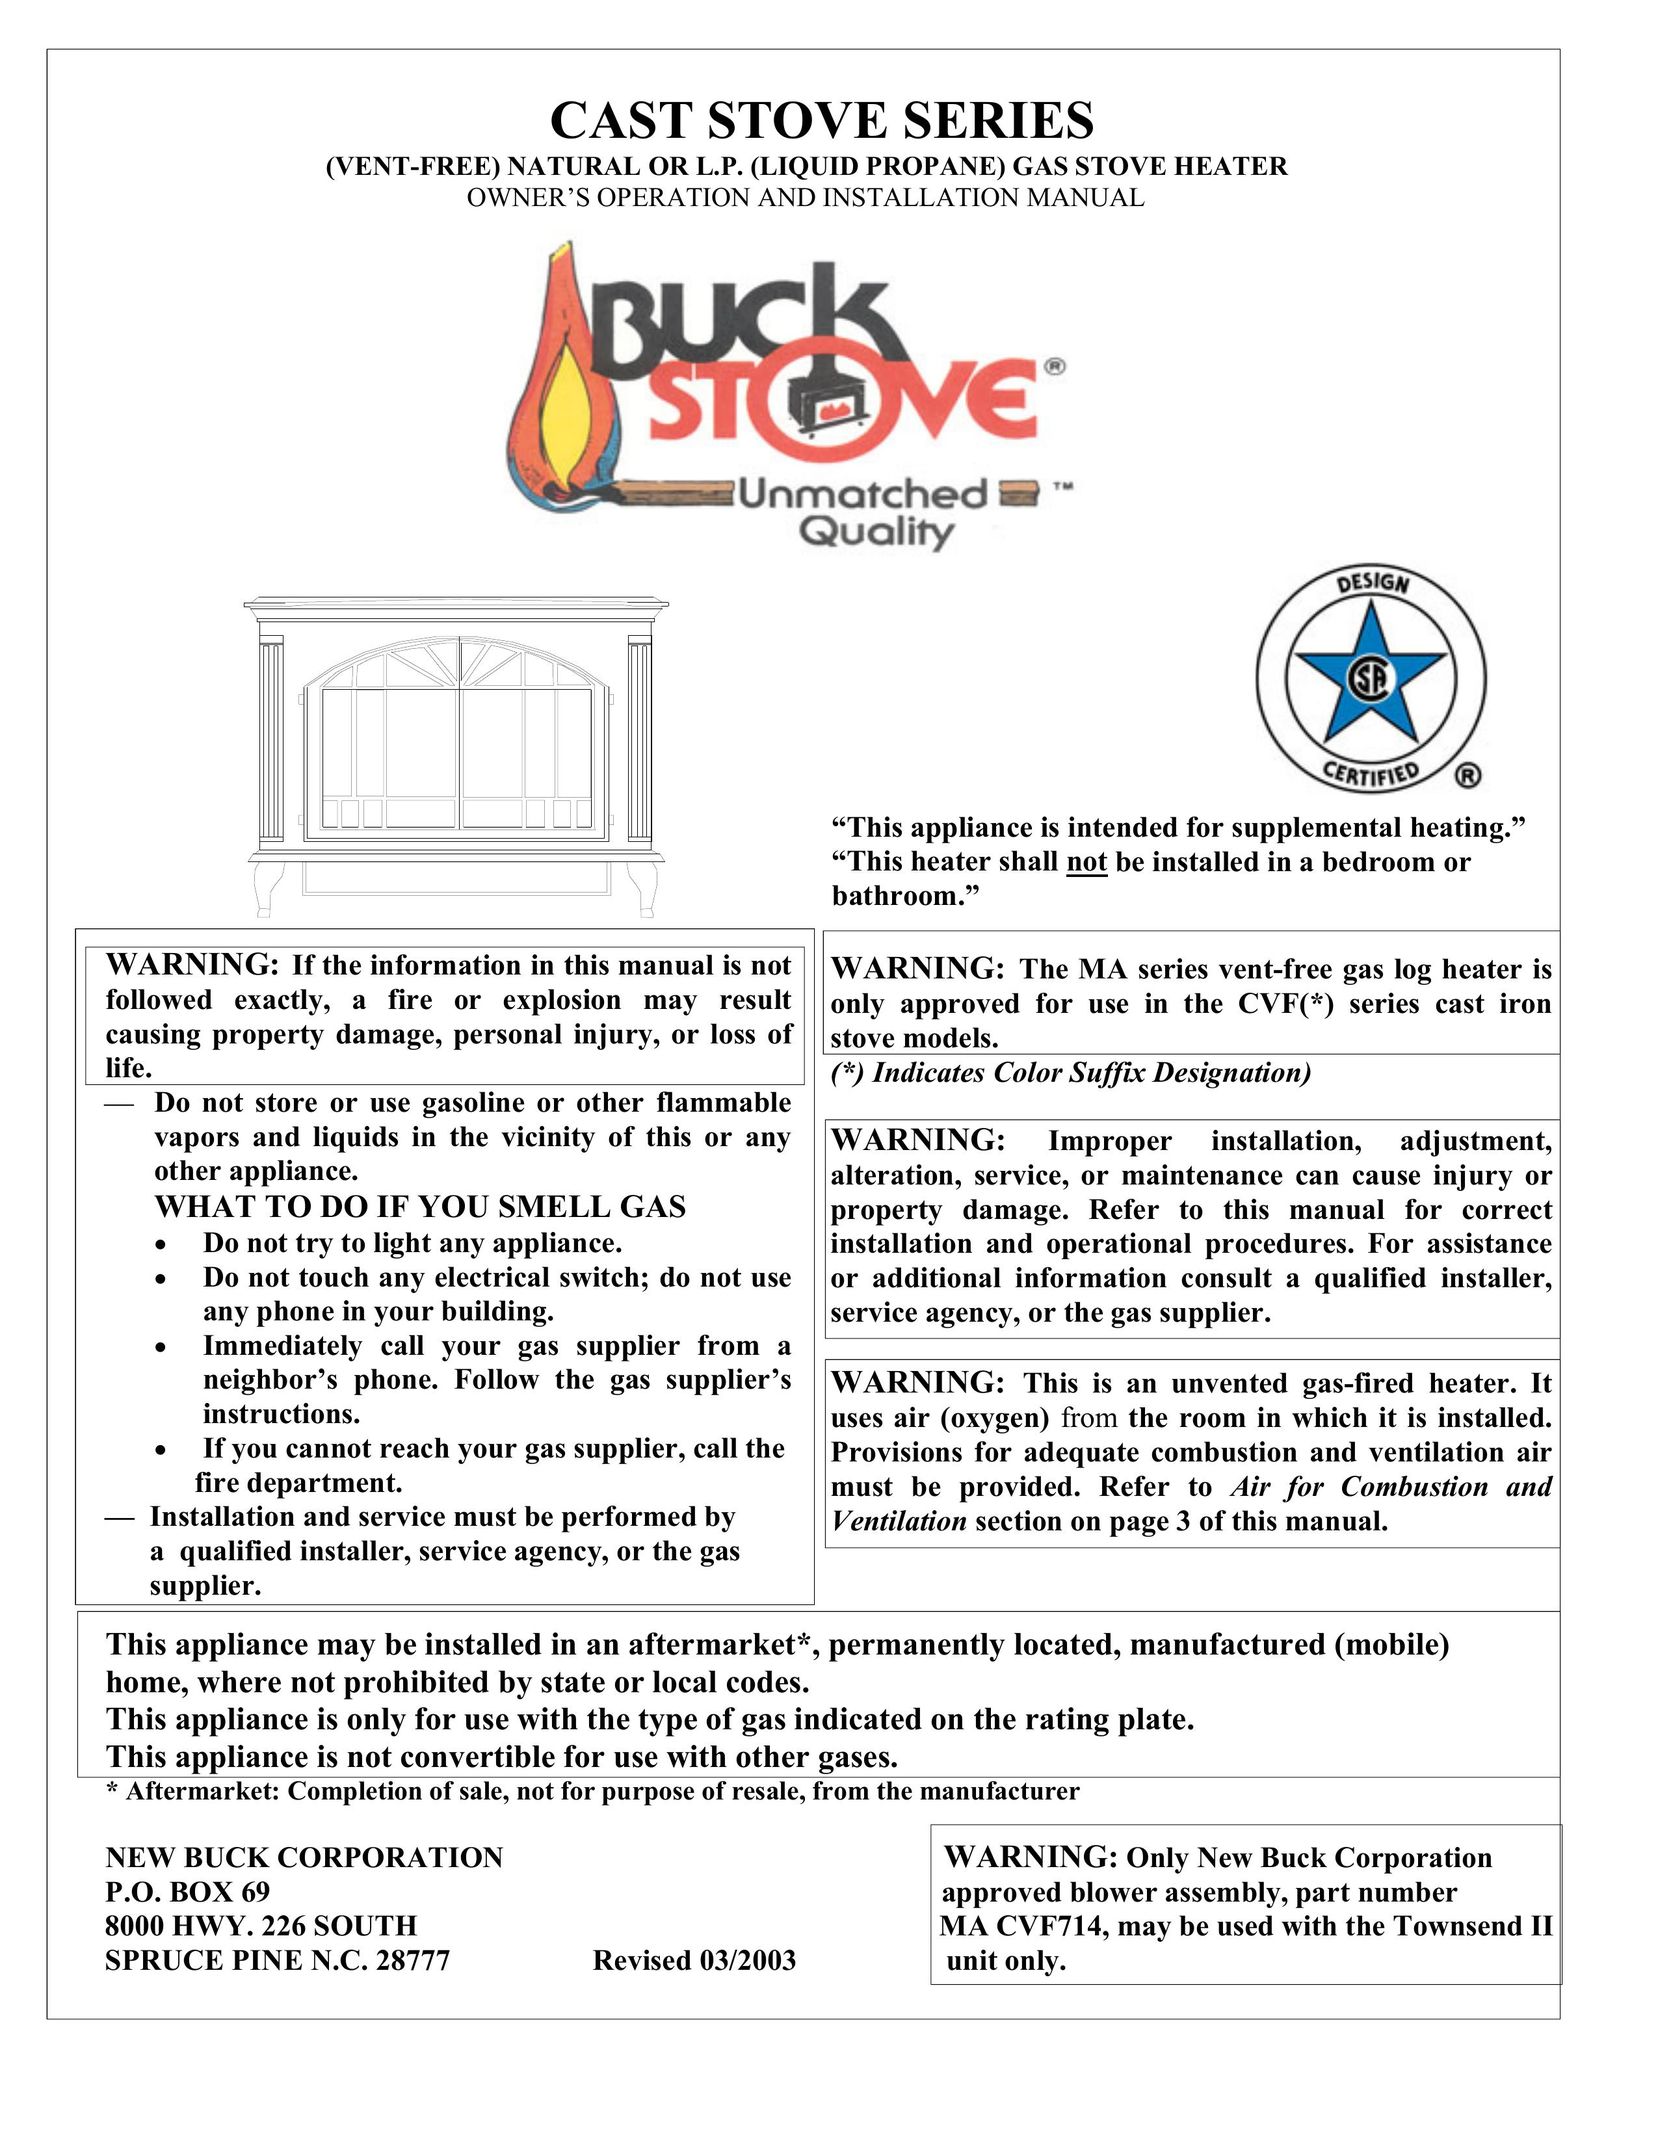 New Buck Corporation GAS STOVE HEATER Stove User Manual